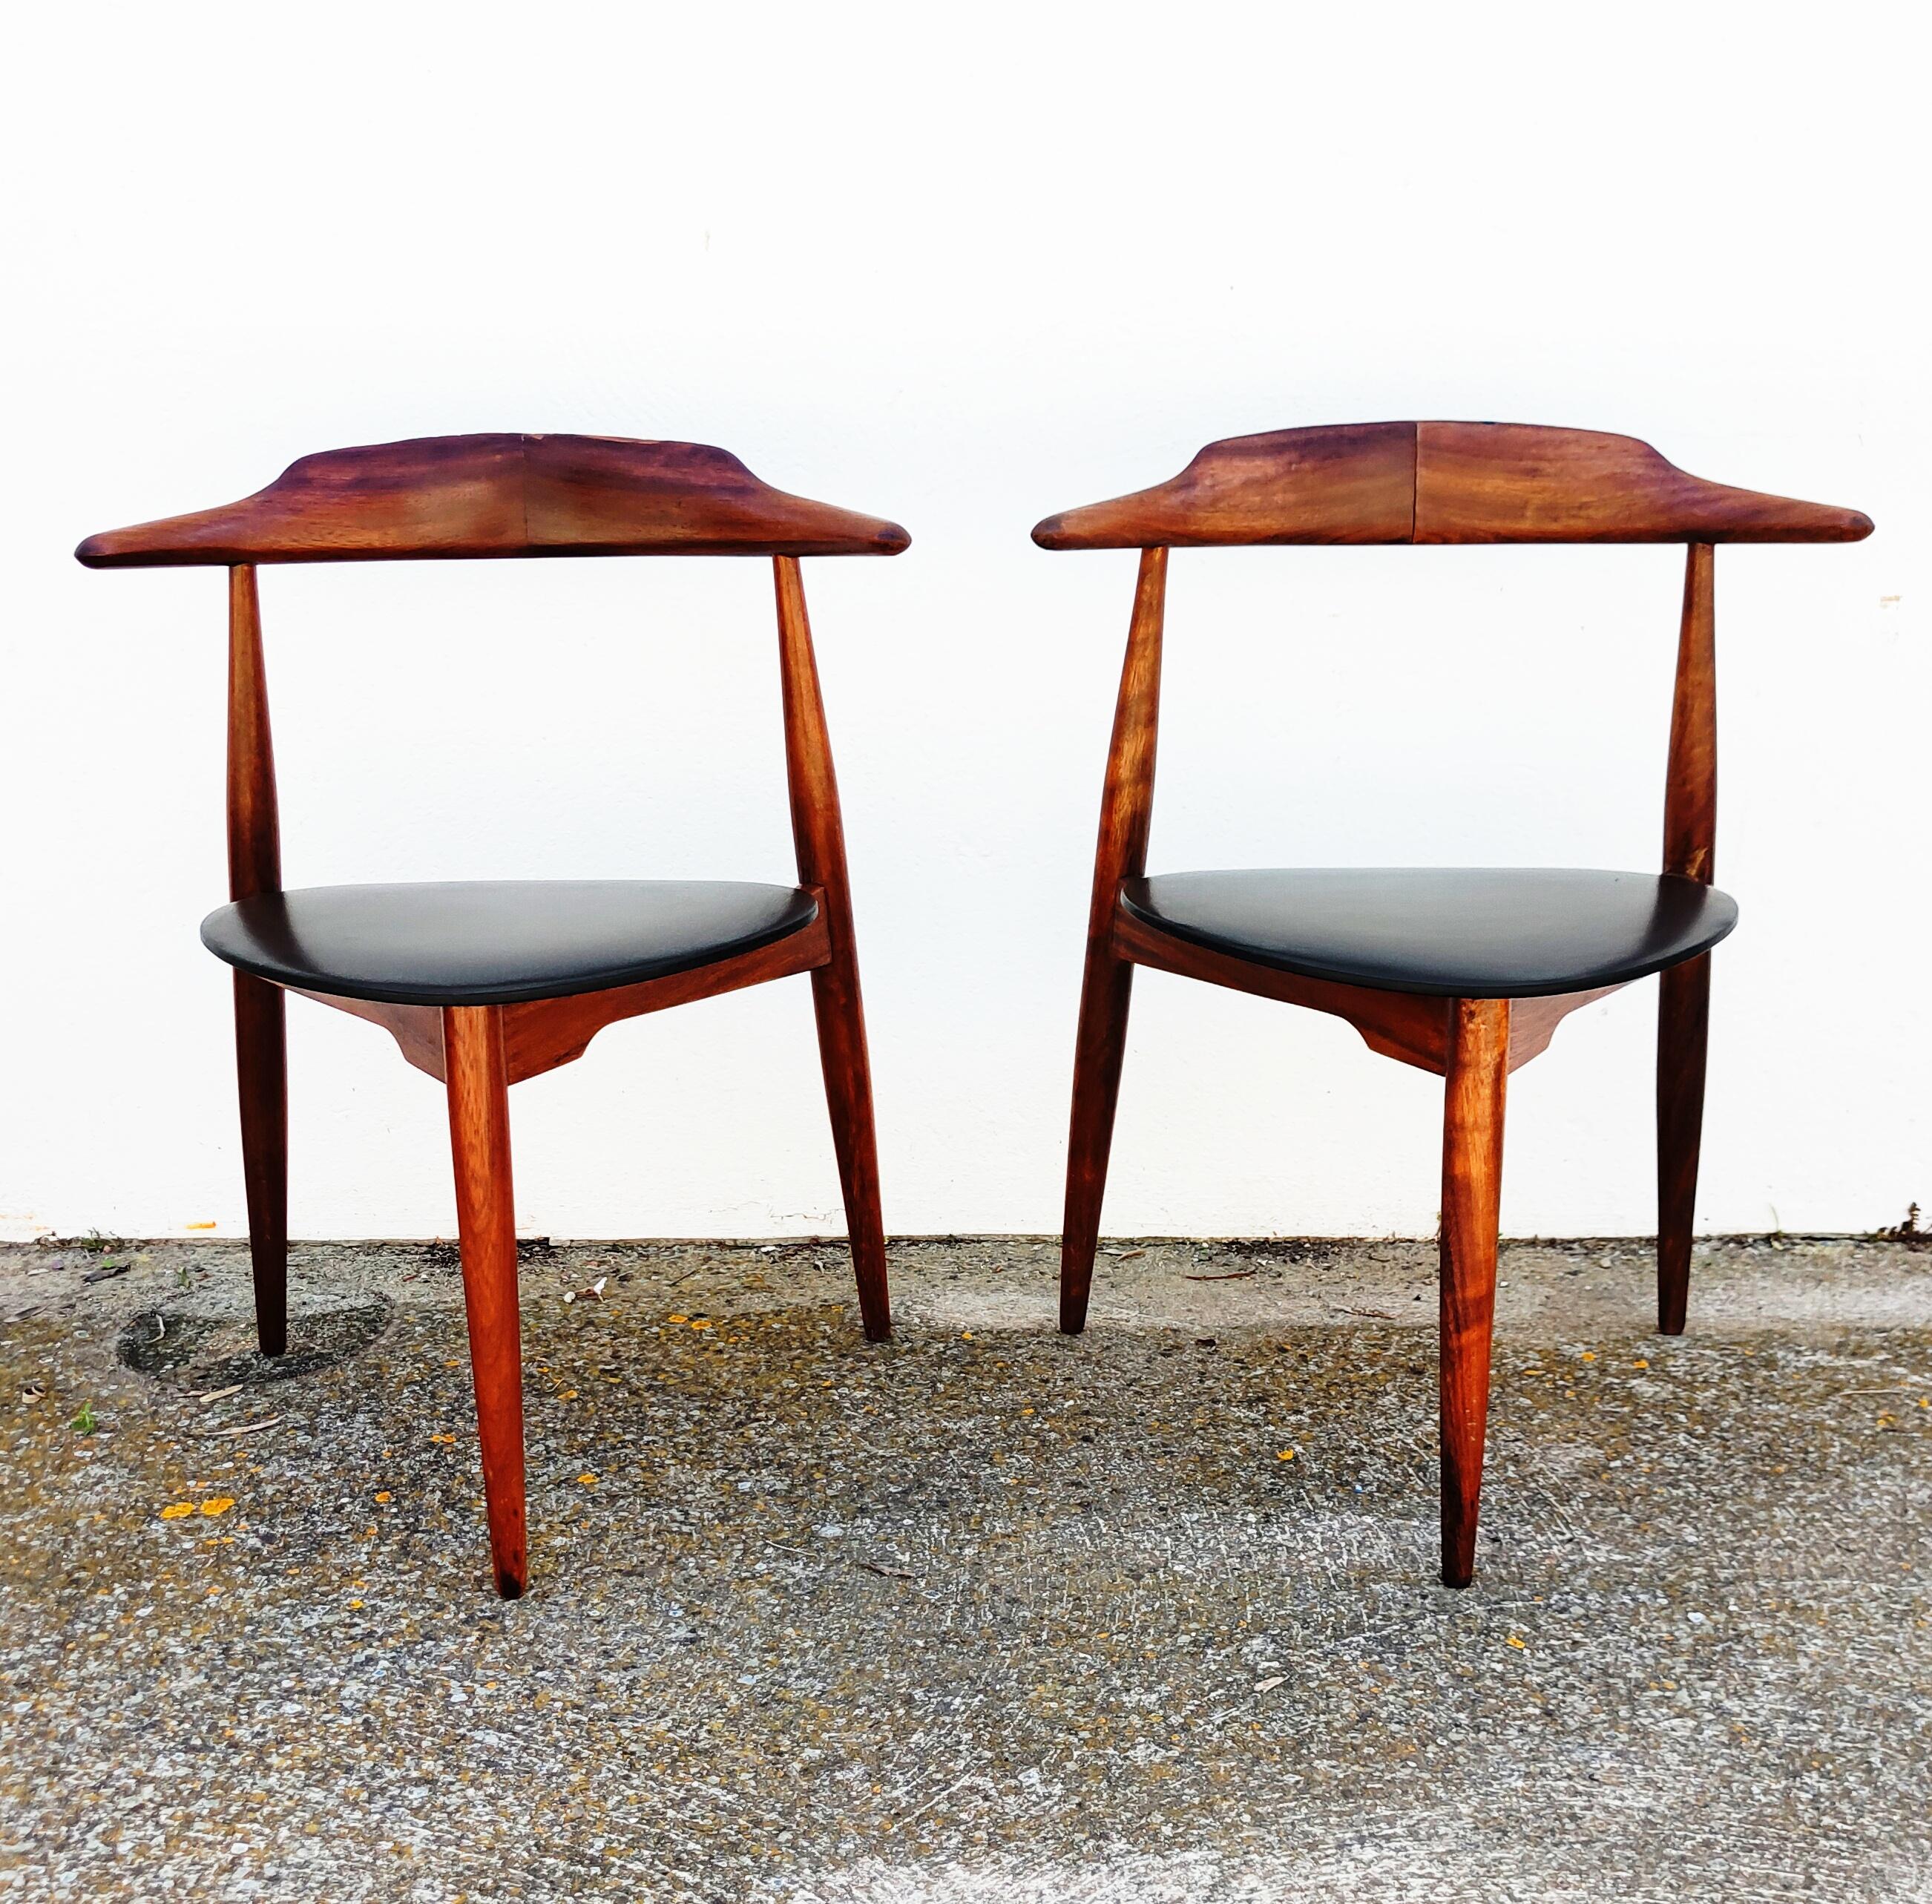 Hans J. Wegner for Fritz Hansen, set of 2 heart chairs FH4103, oak and teak, Denmark, 1953.

These dining chairs are designed by Hans Wegner in 1952. These chairs are designed to take up as little space as possible whilst at the same time having a